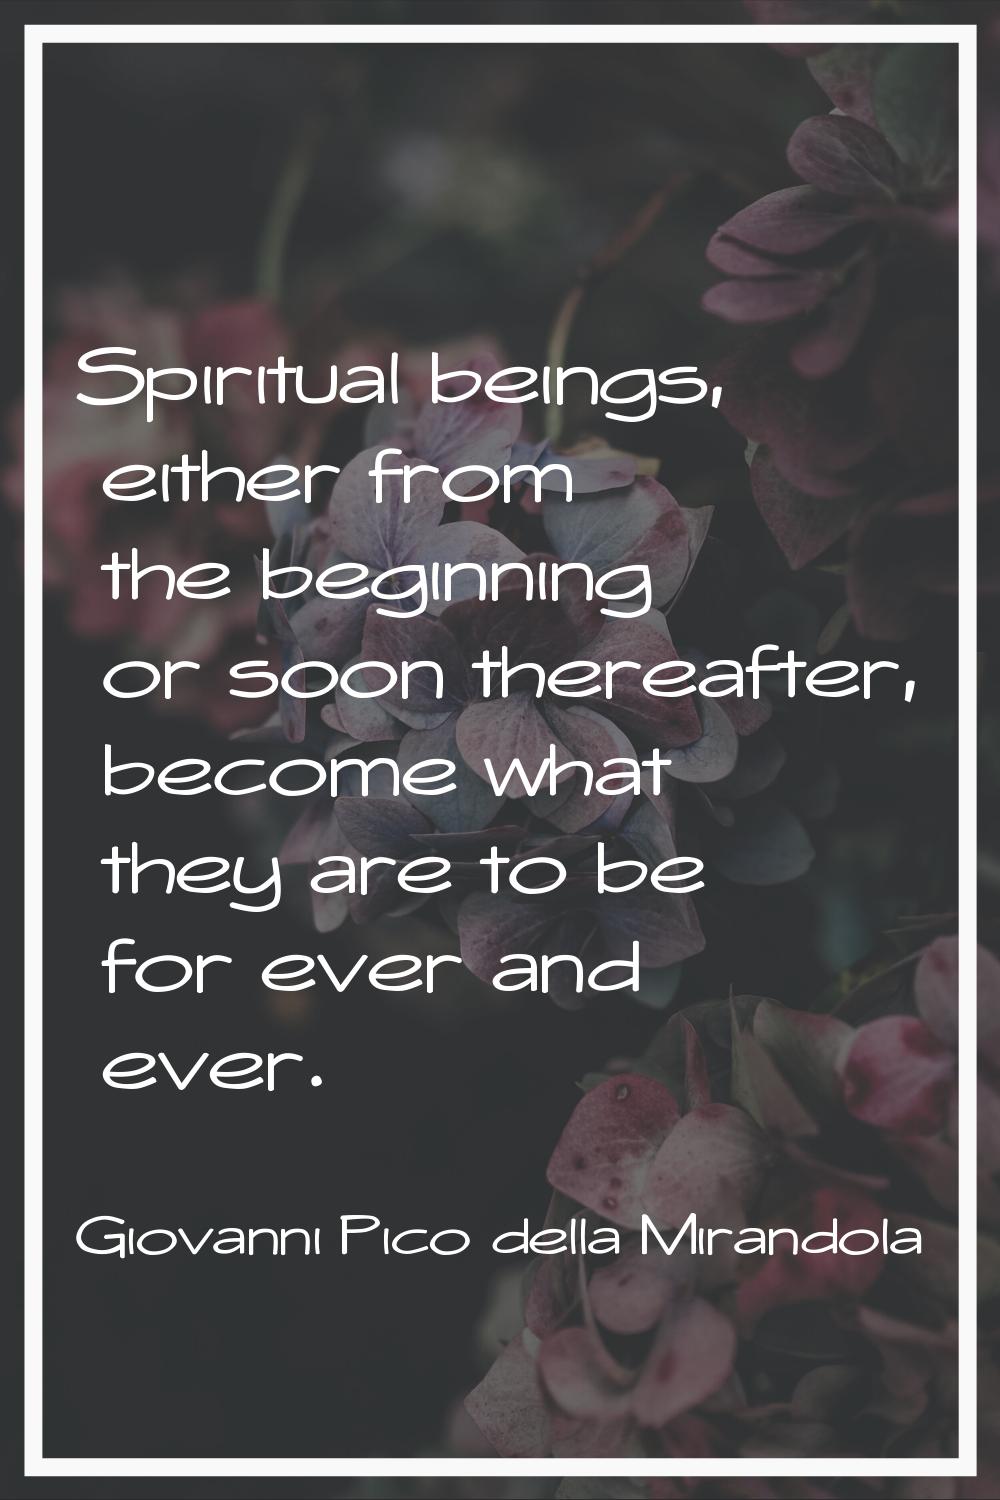 Spiritual beings, either from the beginning or soon thereafter, become what they are to be for ever